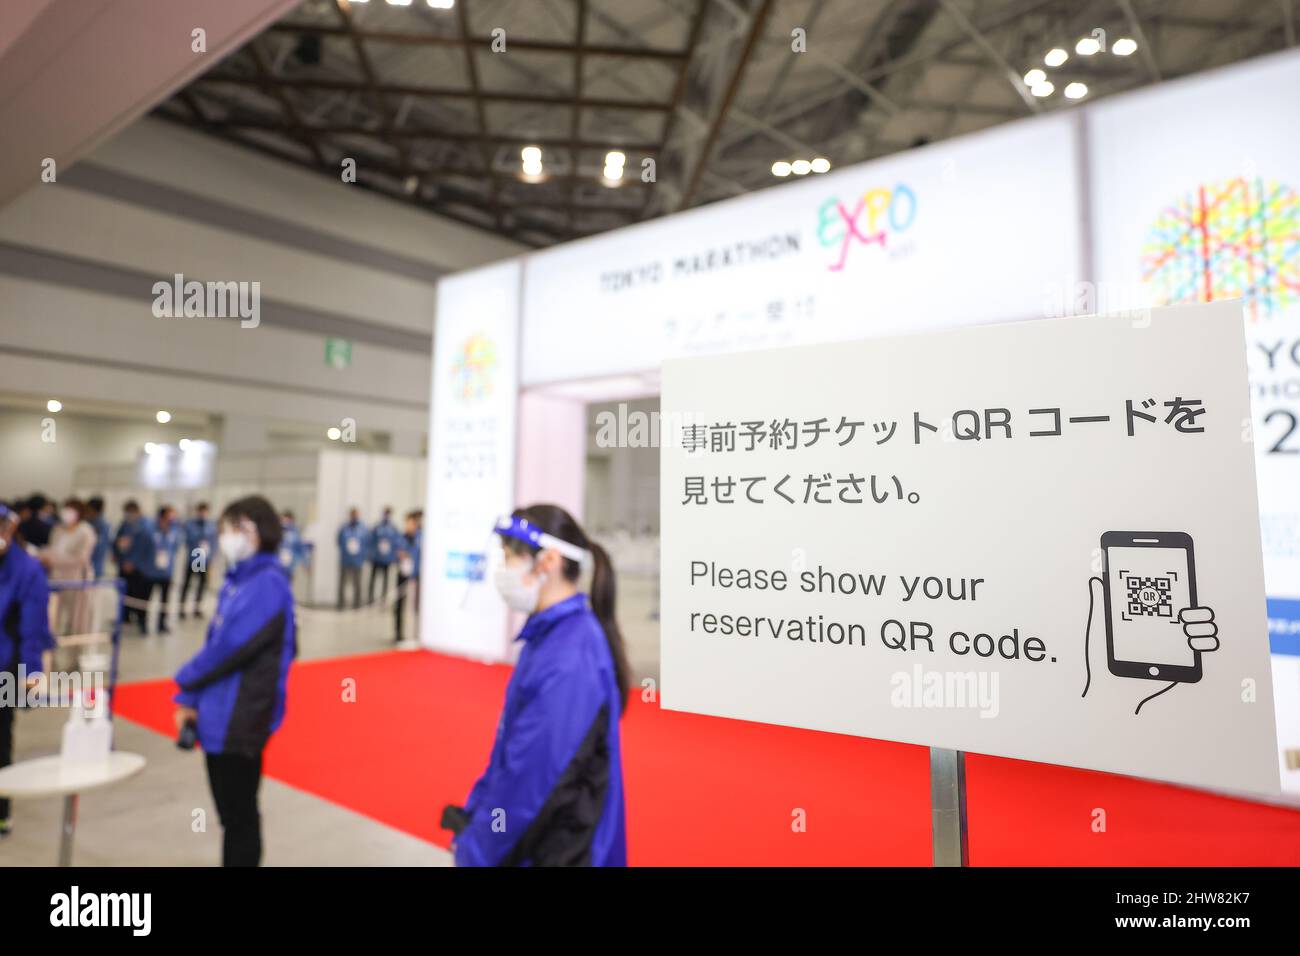 https://c8.alamy.com/comp/2HW82K7/tokyo-japan-03rd-mar-2022-opening-ceremony-of-tokyo-marathon-2021-expo-runner-registration-and-reception-the-entrance-on-march-3-2022-in-tokyo-japan-photo-by-kazuki-oishisipa-usa-credit-sipa-usaalamy-live-news-2HW82K7.jpg